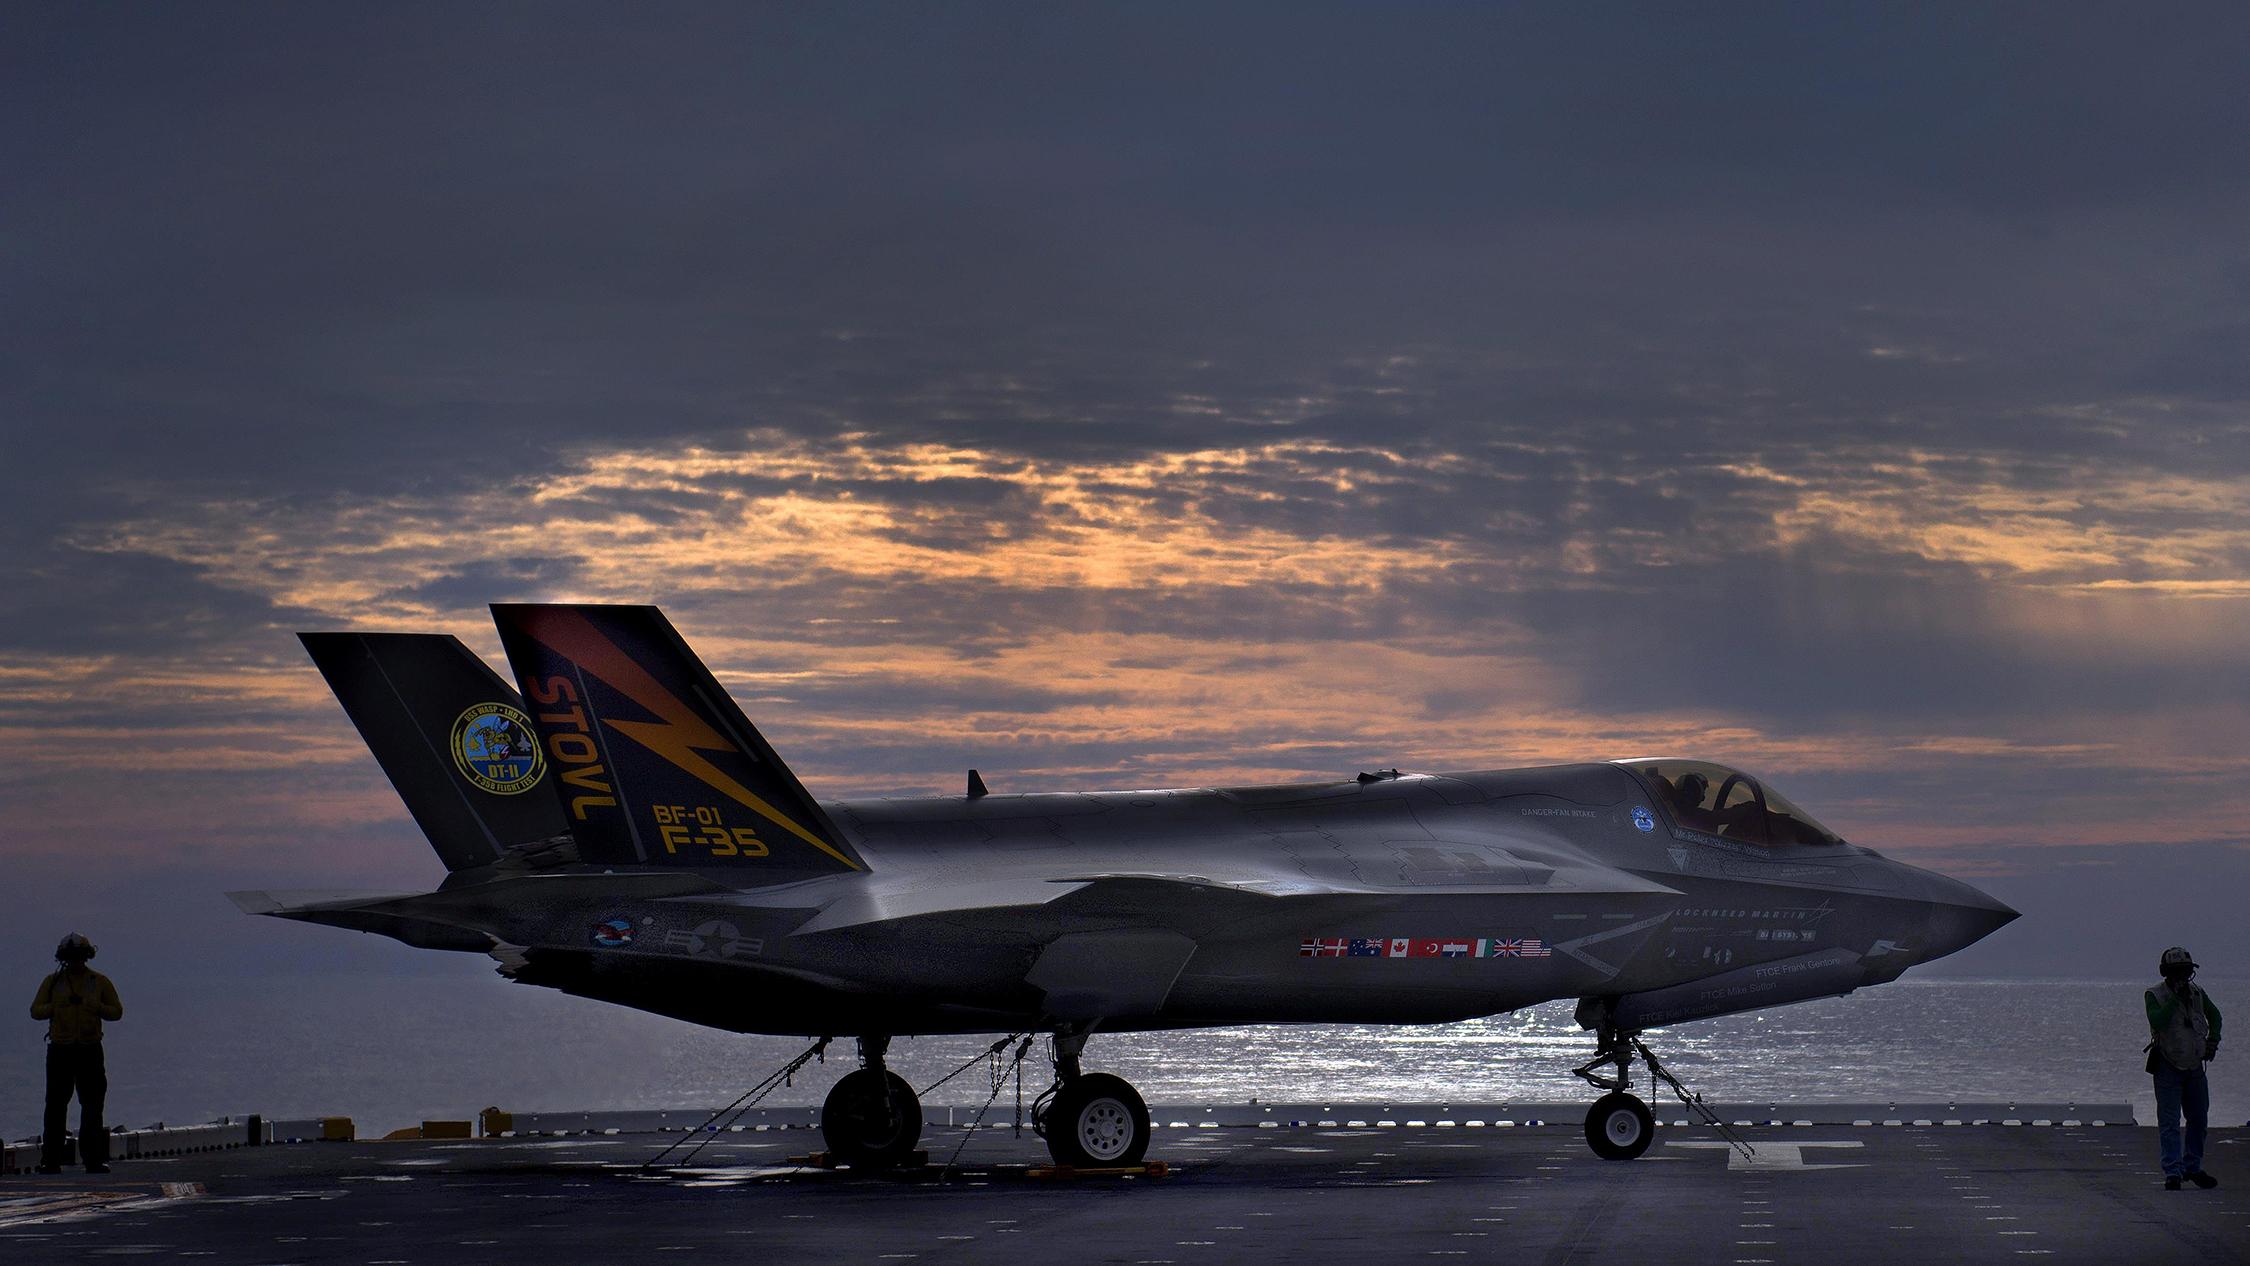 MPC Presents: A Poster Documentary Of The Lockheed Martin F 35